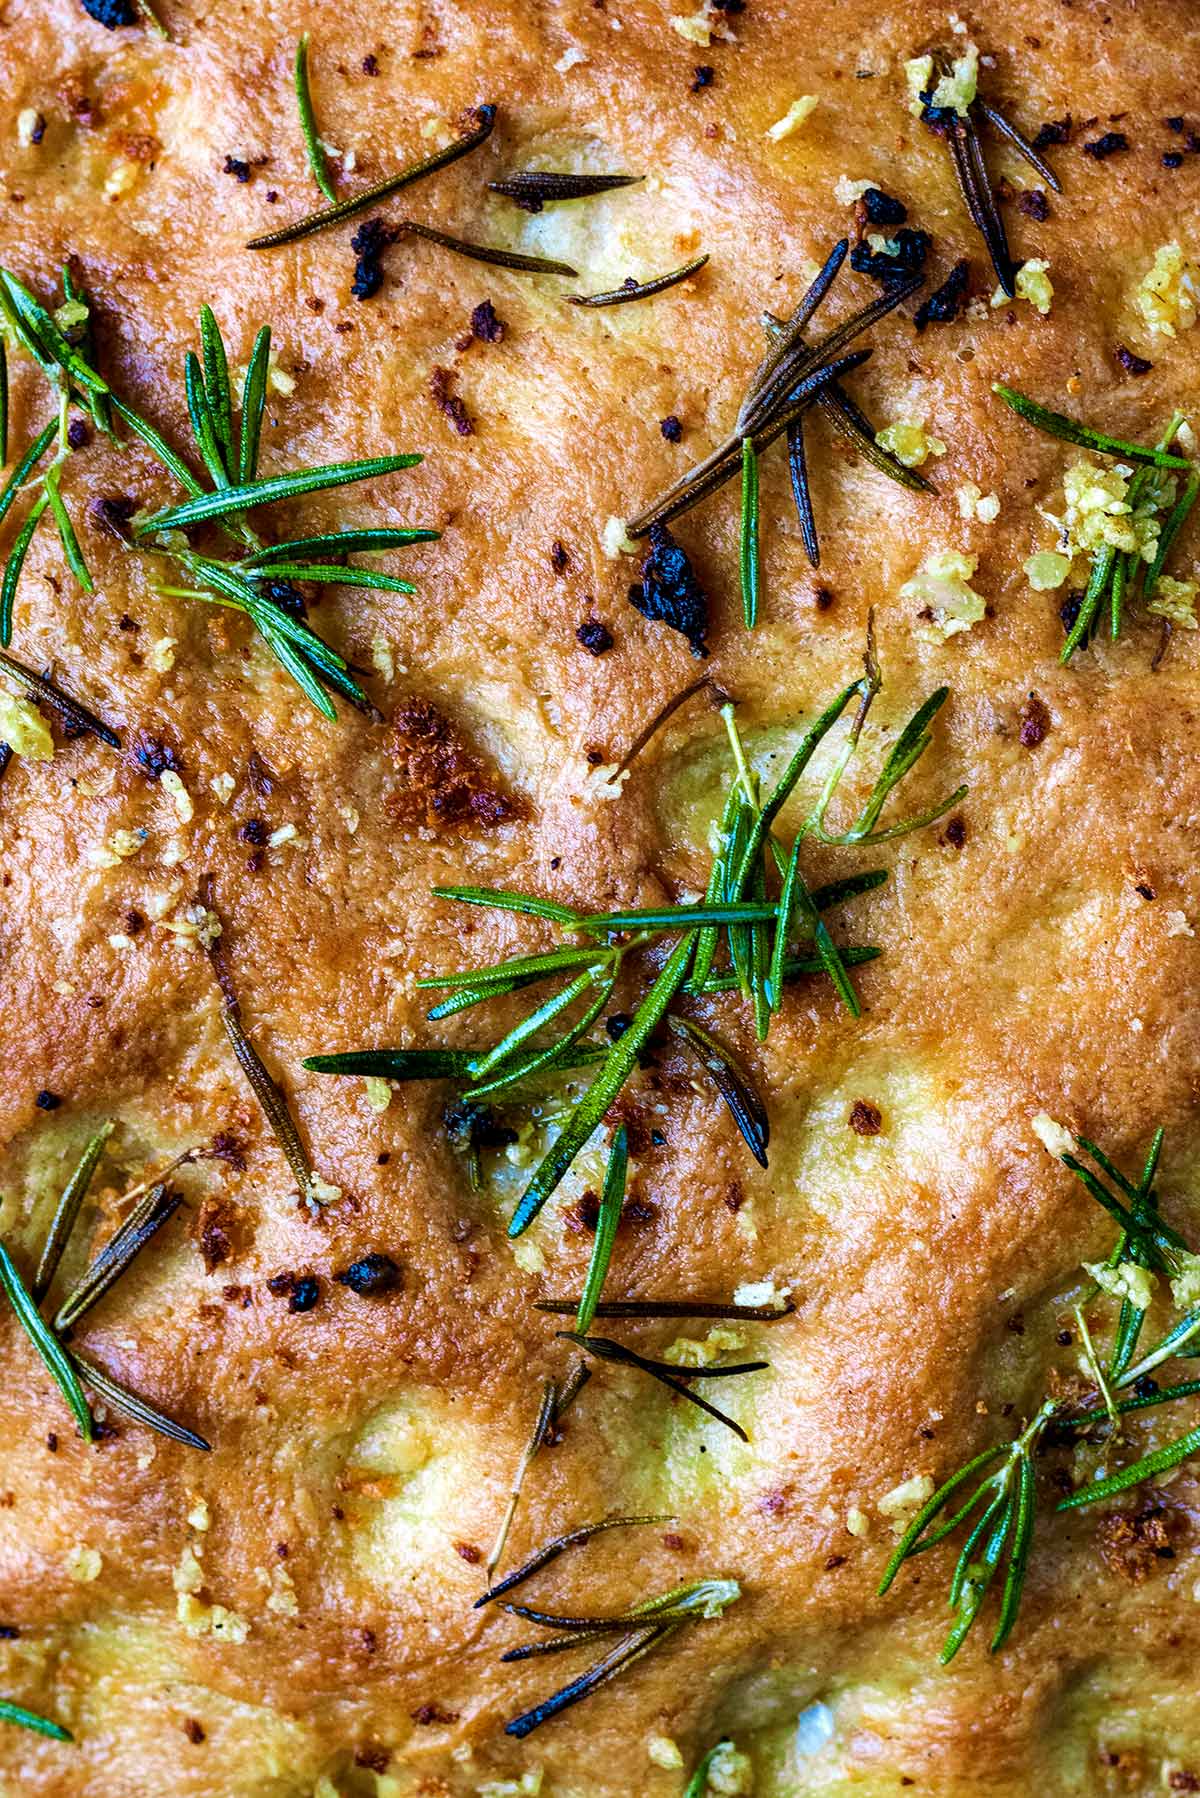 Rosemary leaves on top of cooked focaccia.